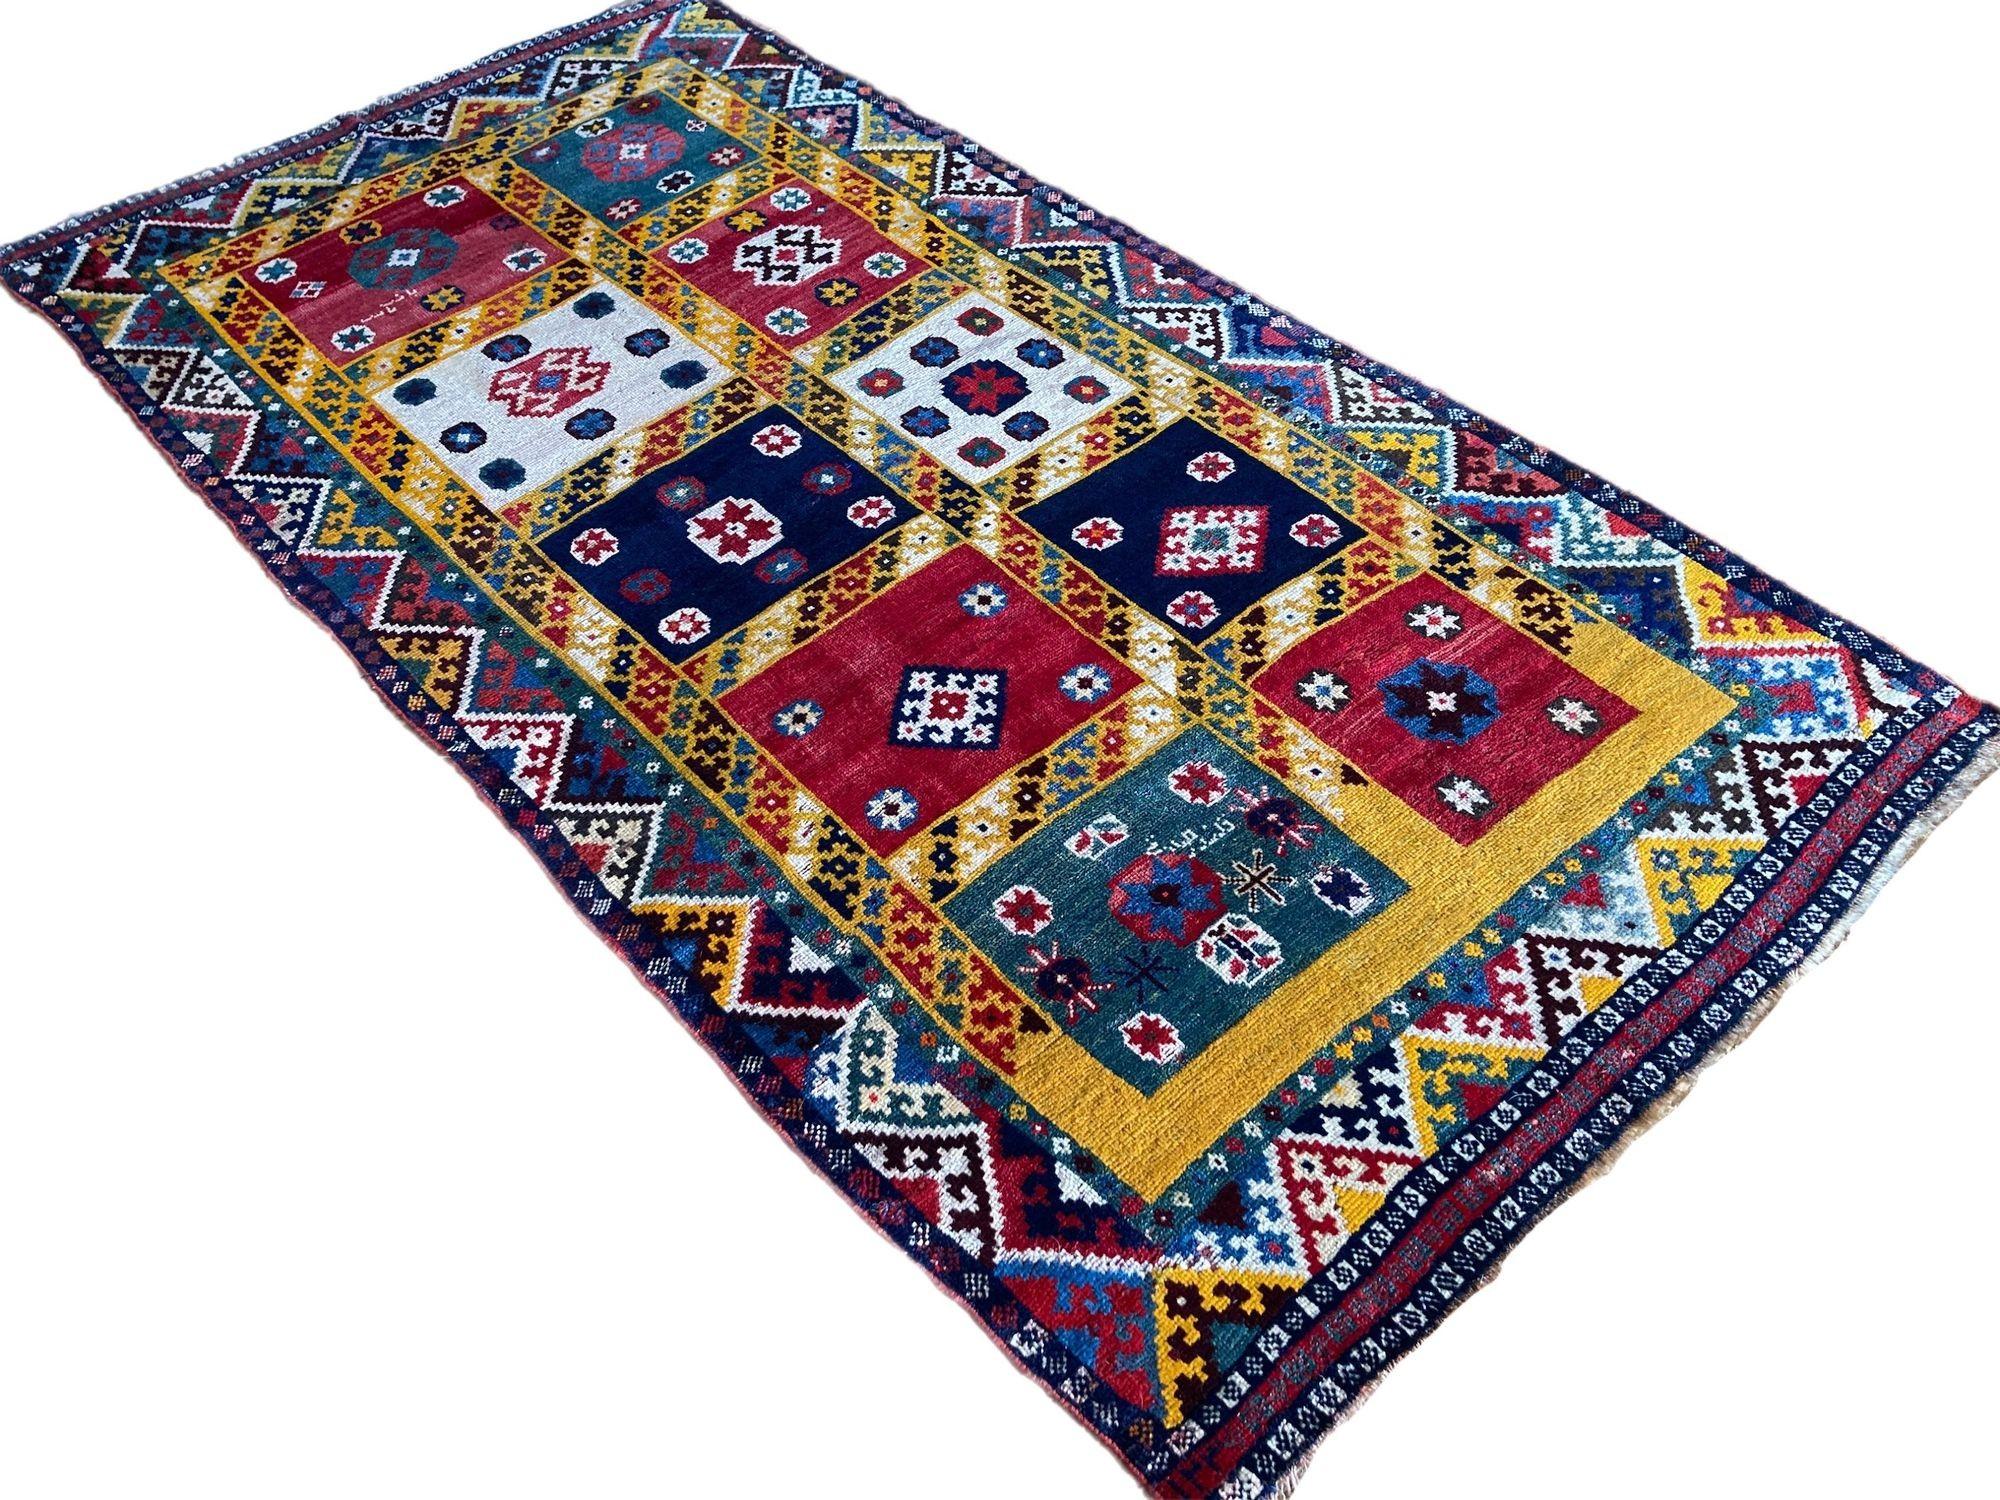 Antique Gabbeh Rug 2.68m X 1.42m In Good Condition For Sale In St. Albans, GB